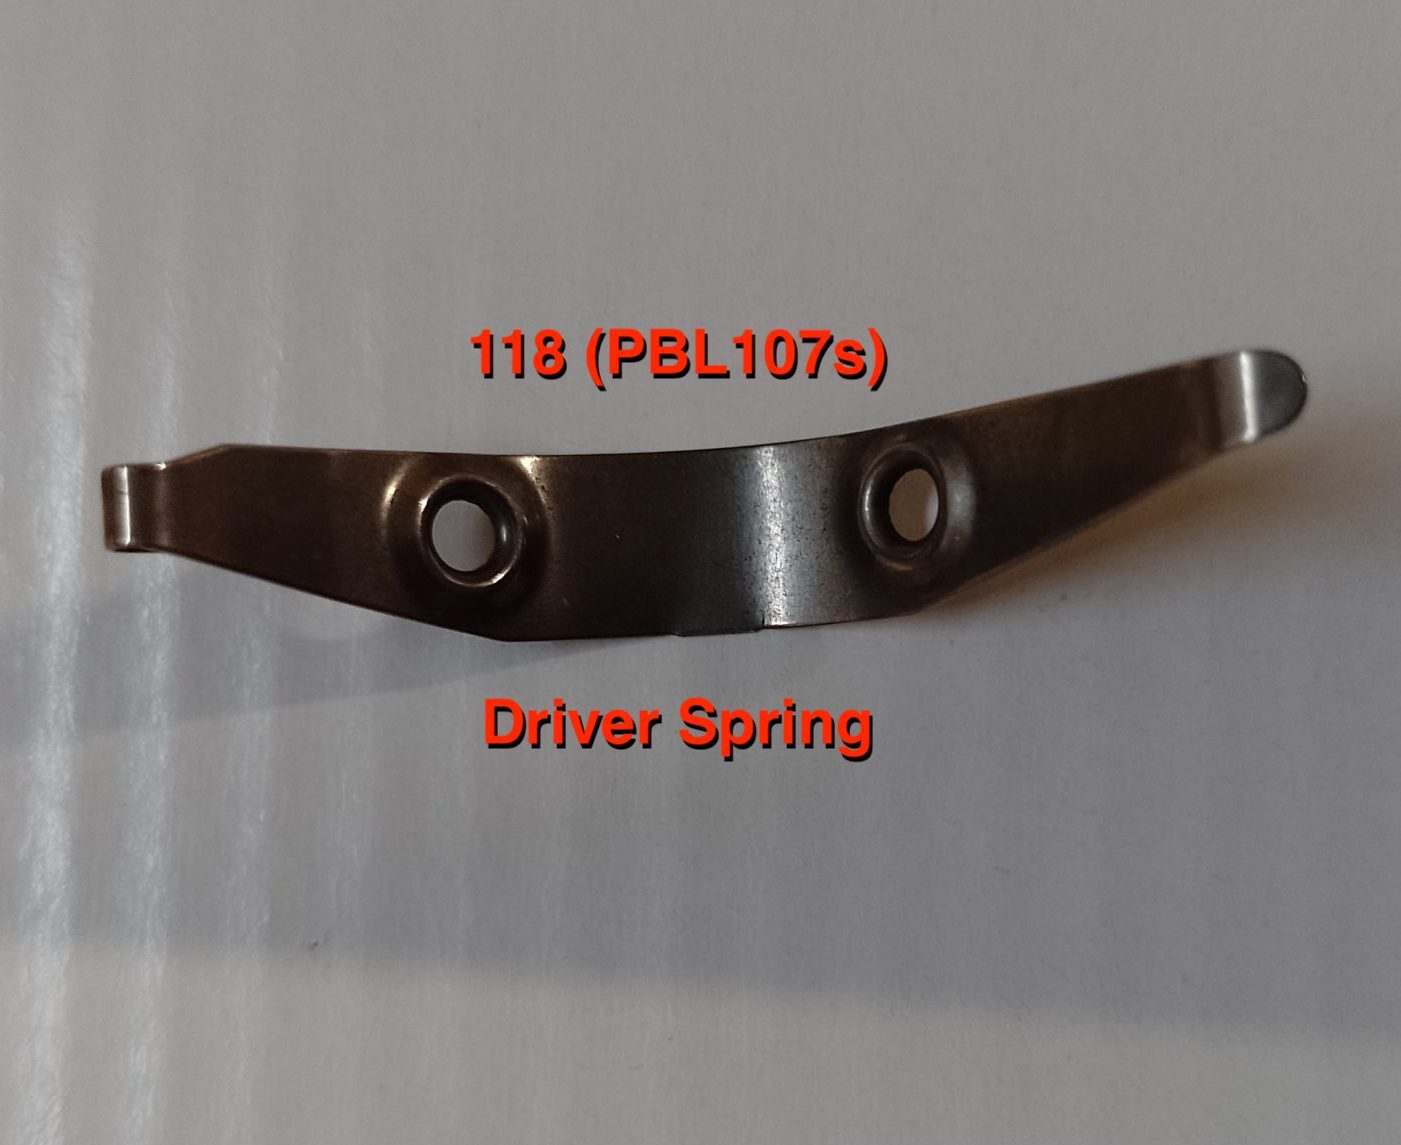 118 (PBL107s) Driver Spring